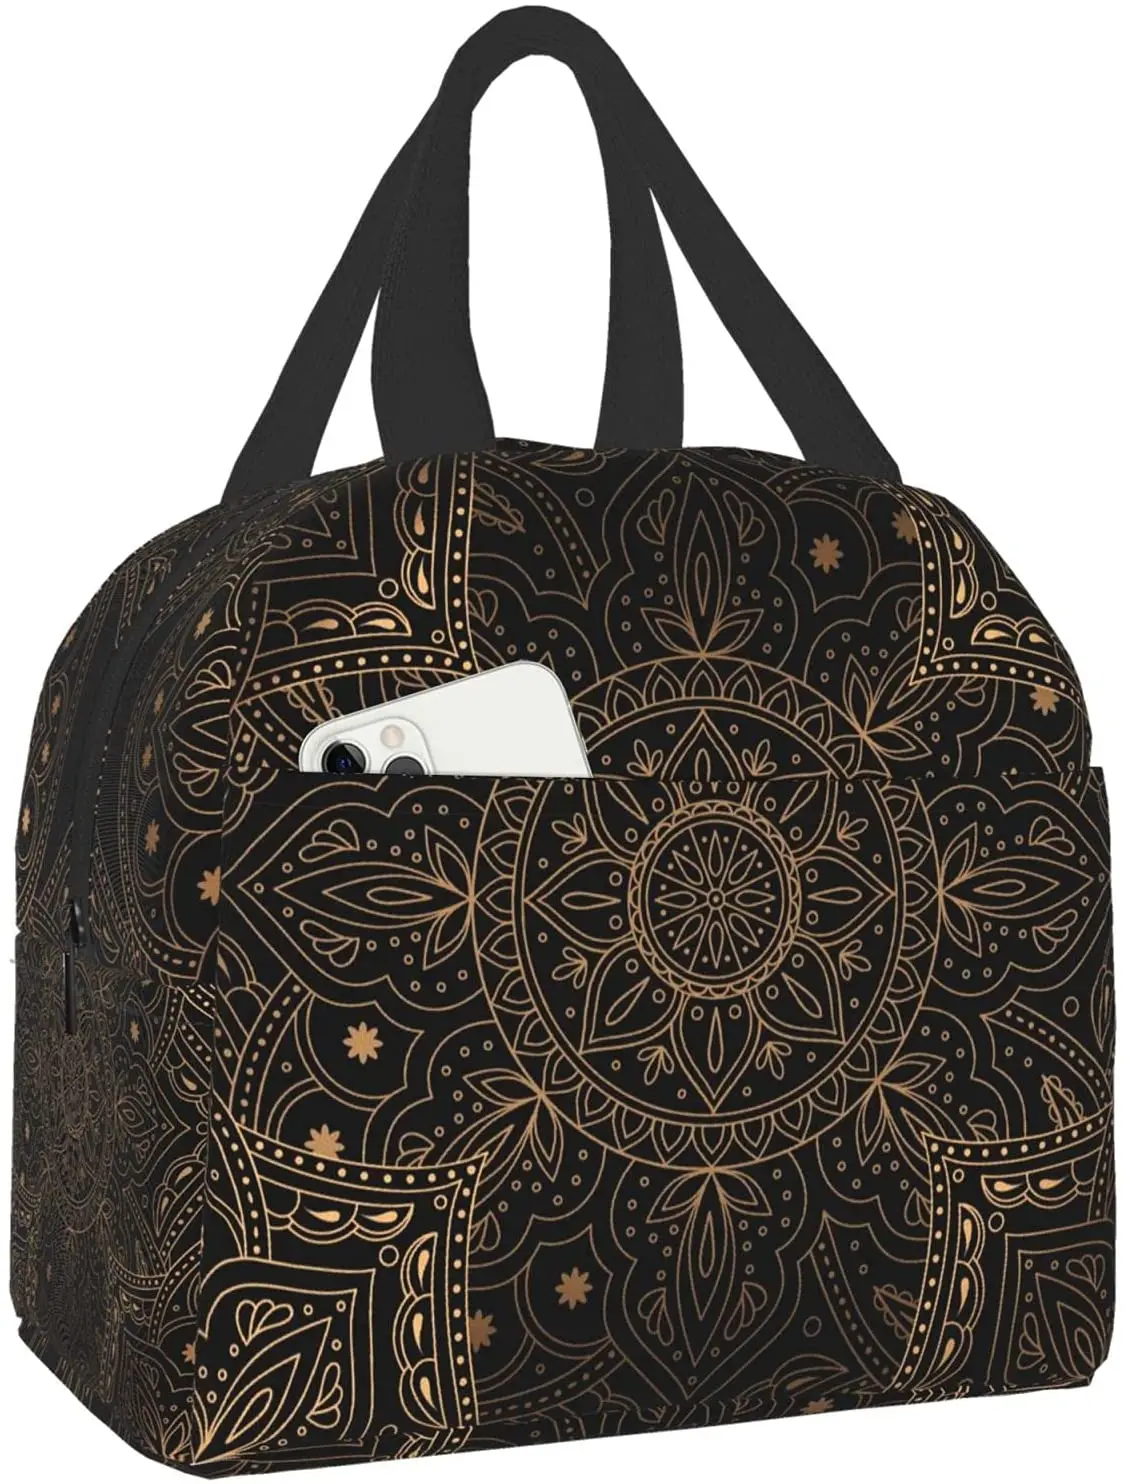 

Lunch Bag for Women Luxury Oriental Mandala Royal Retro Floral Black Antique Insulated Lunch Box Cooler Tote for Work School